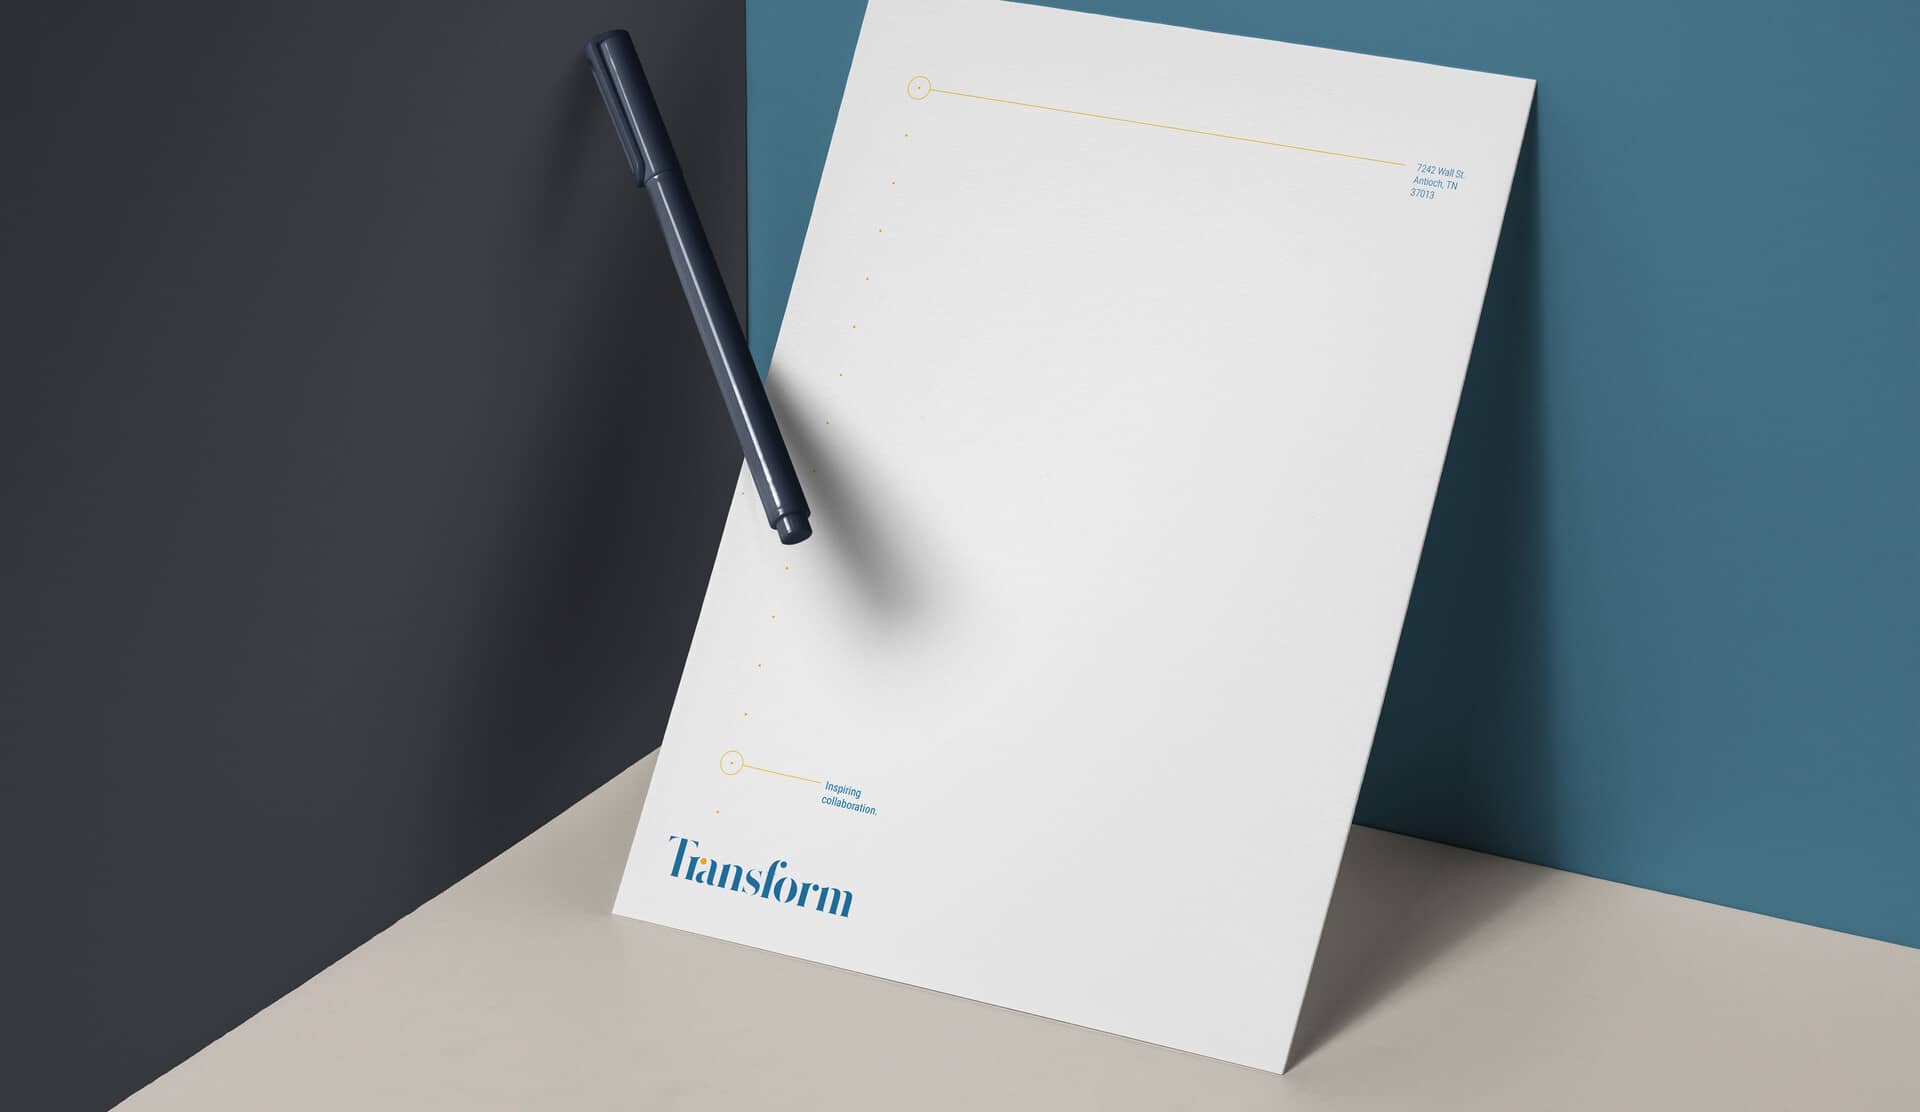 Transform letterhead design on thick paper resting on a blue background